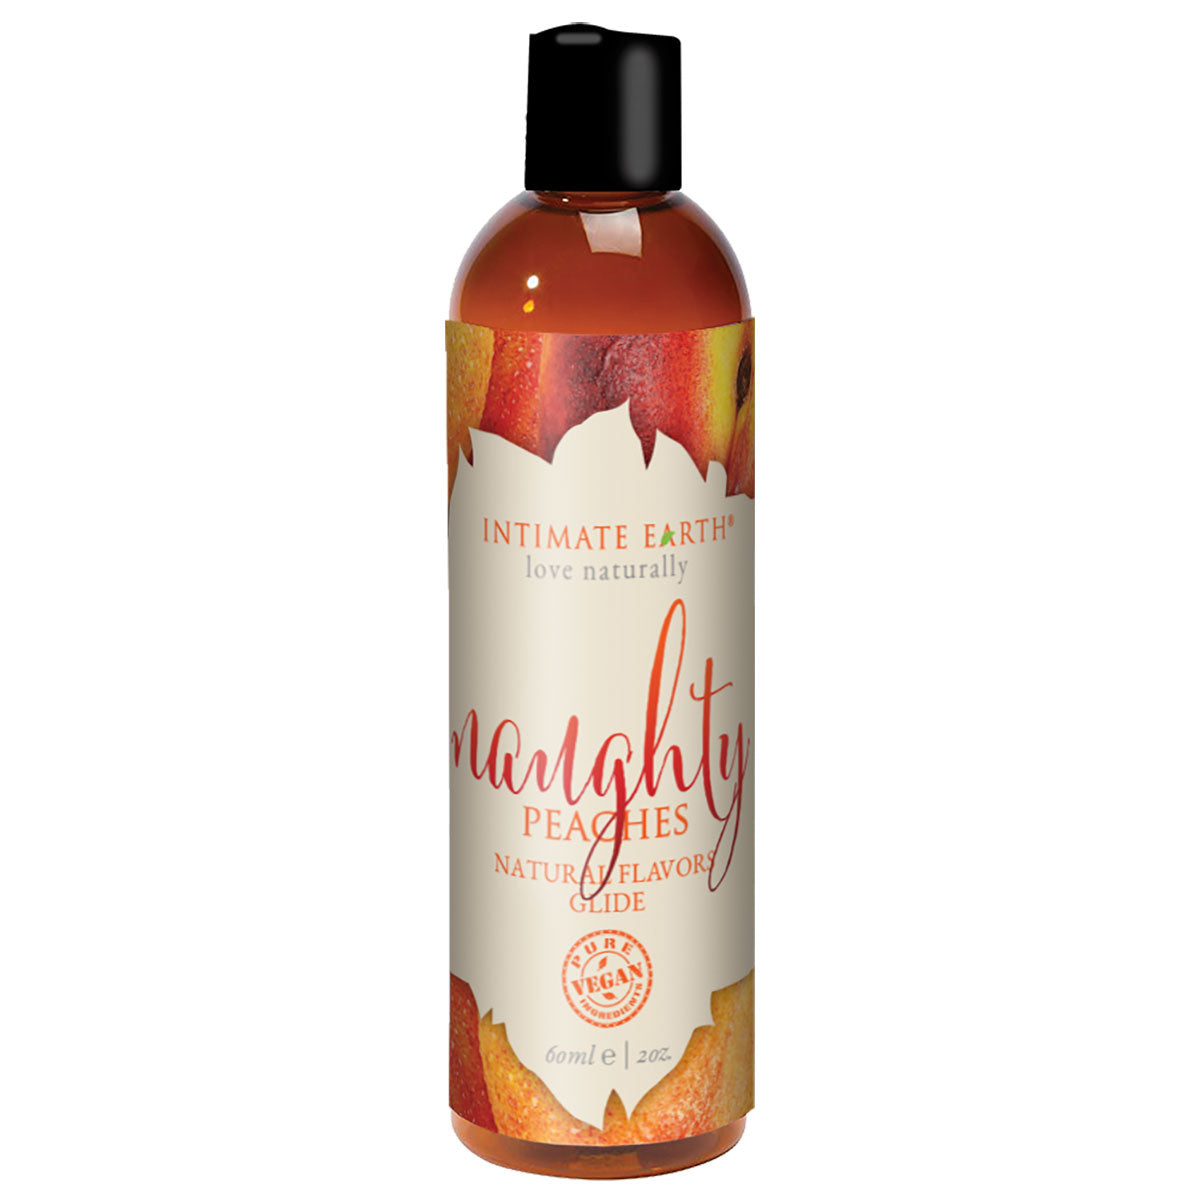 Intimate Earth Flavored Glide - Naughty Peaches 2oz